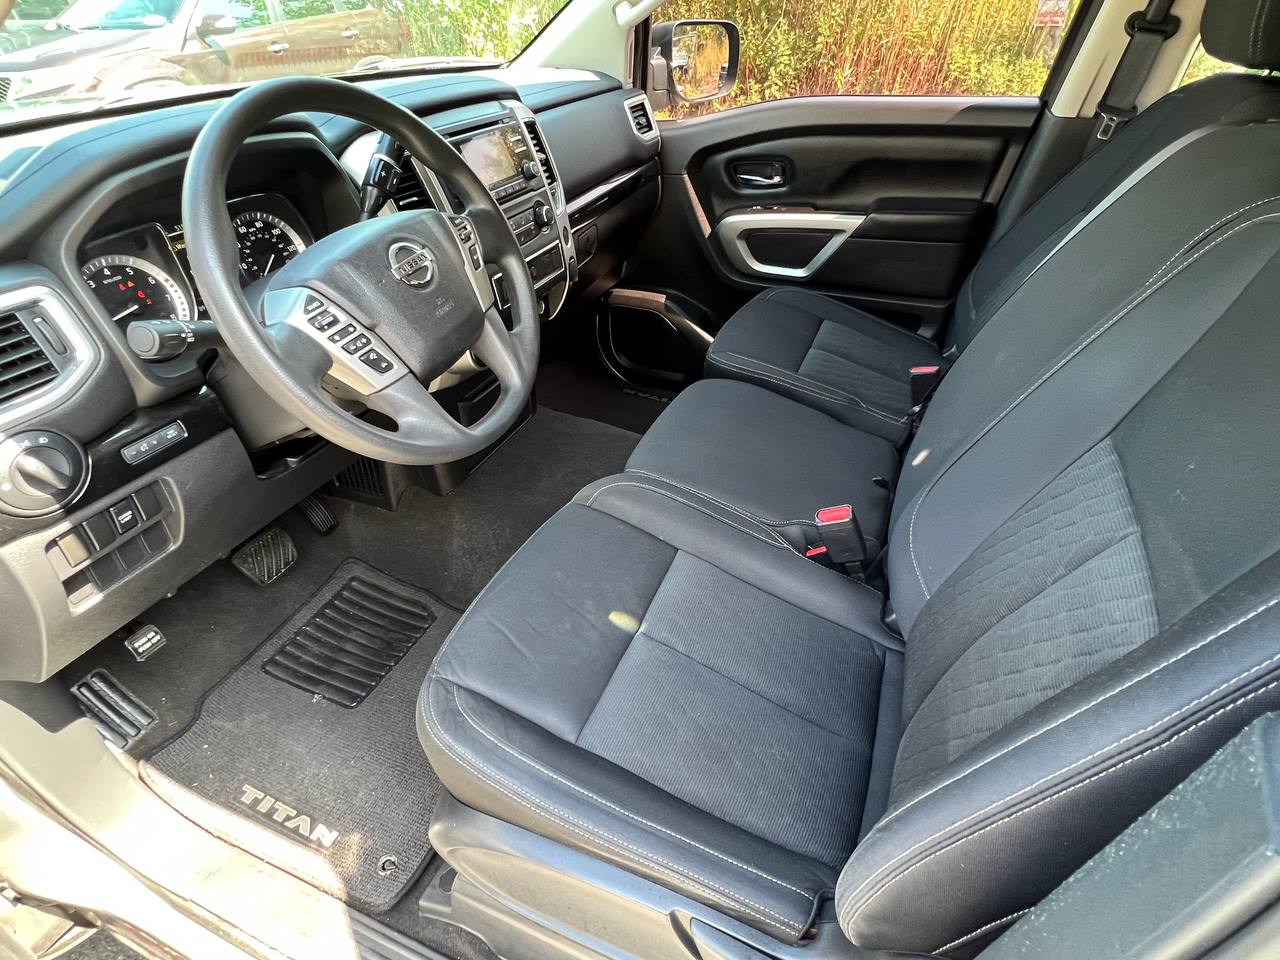 Used - Nissan Titan SV 4x4 Crew Cab Pickup Truck for sale in Staten Island NY